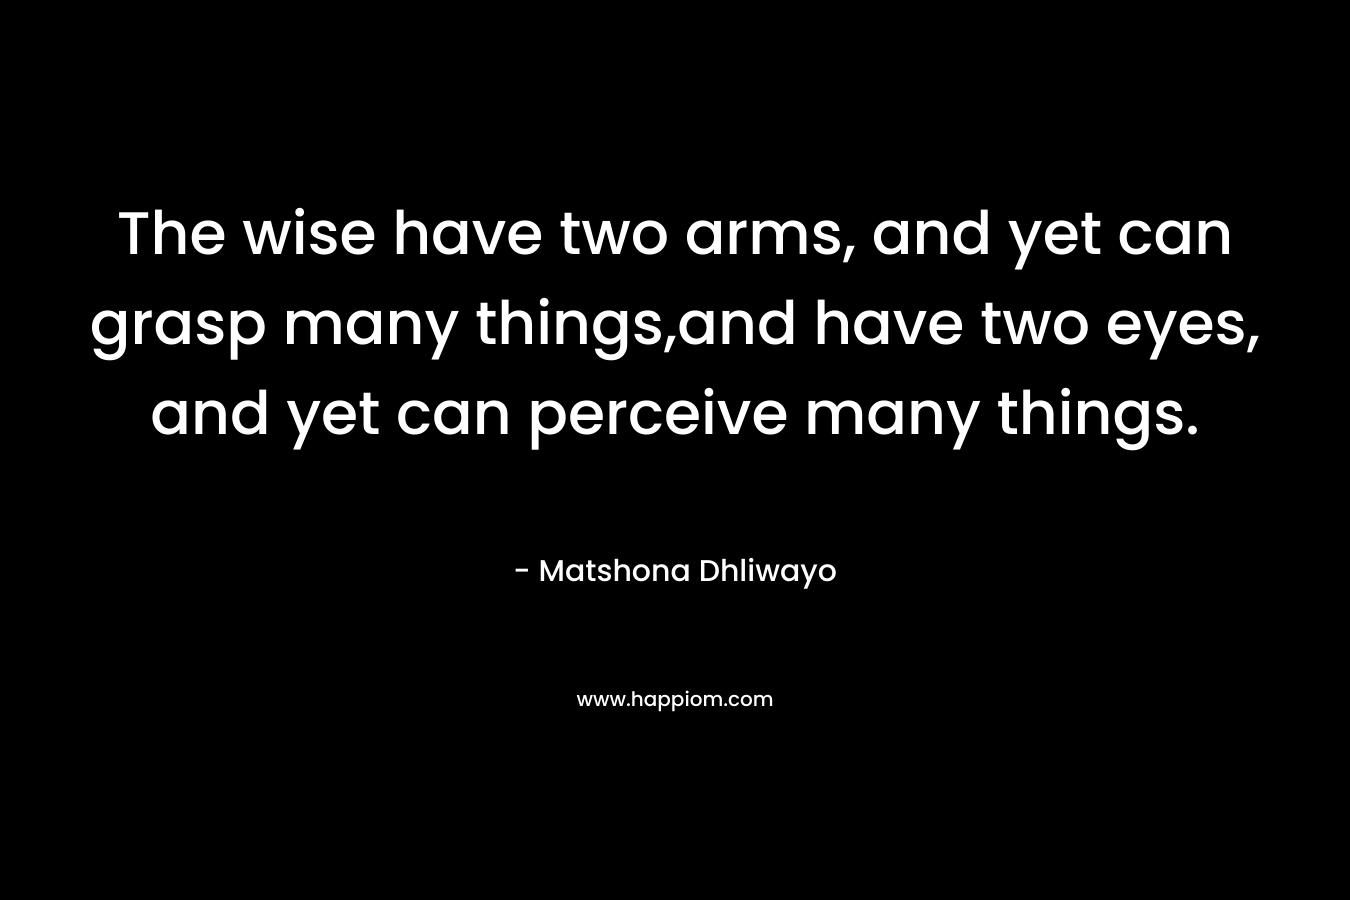 The wise have two arms, and yet can grasp many things,and have two eyes, and yet can perceive many things. – Matshona Dhliwayo